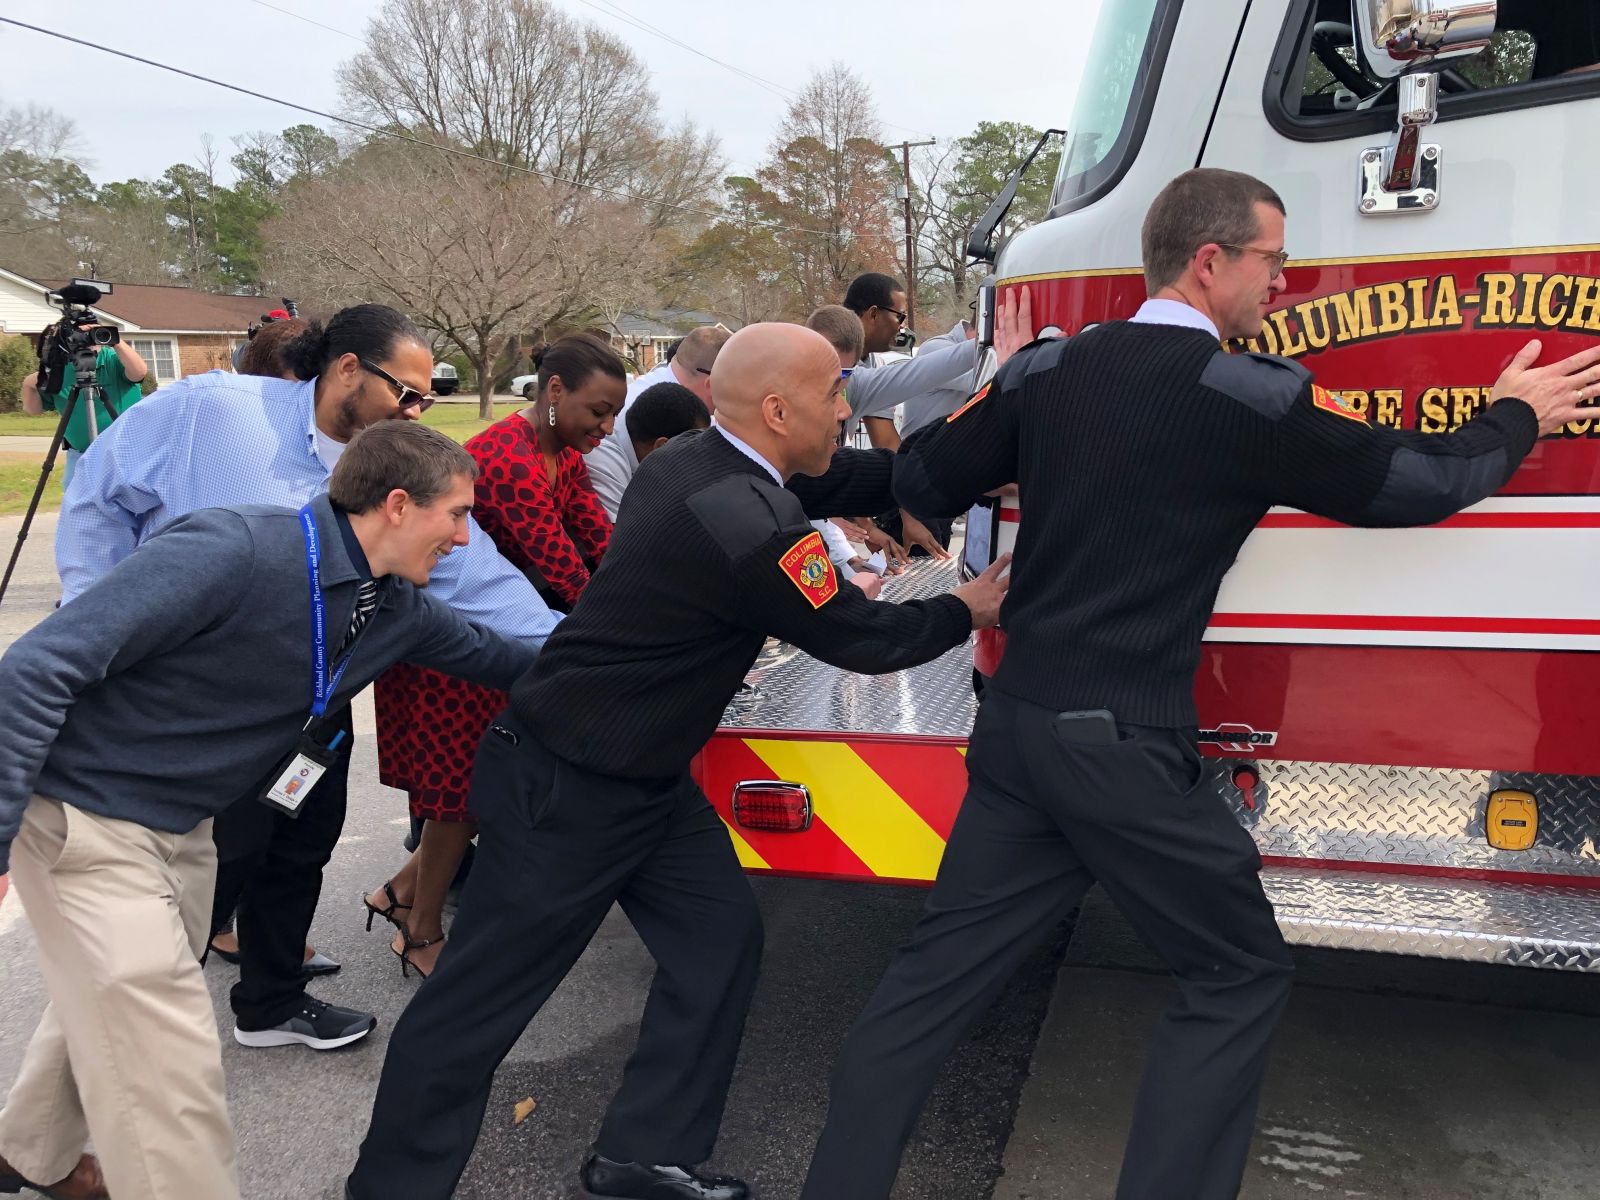 Richland County officials and firefighters with the Columbia-Richland County Fire Department help push a new firetruck into the bay at Capitol View Station on Monday. (Photo/Provided)